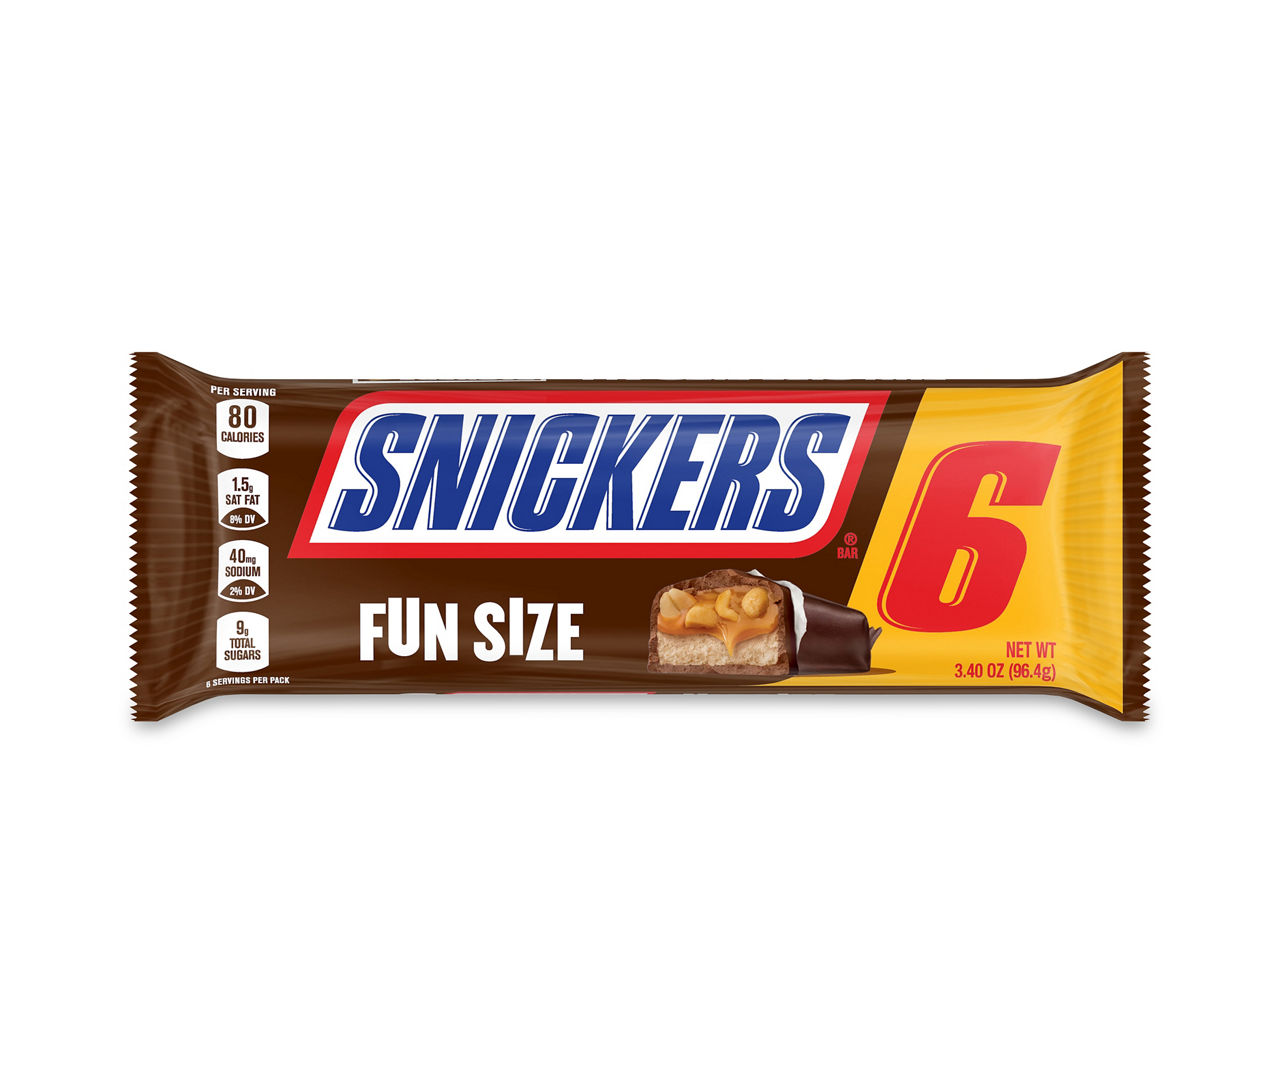 Snickers SNICKERS Fun Size Chocolate Candy Bars, 3.4 oz (6 Pack)